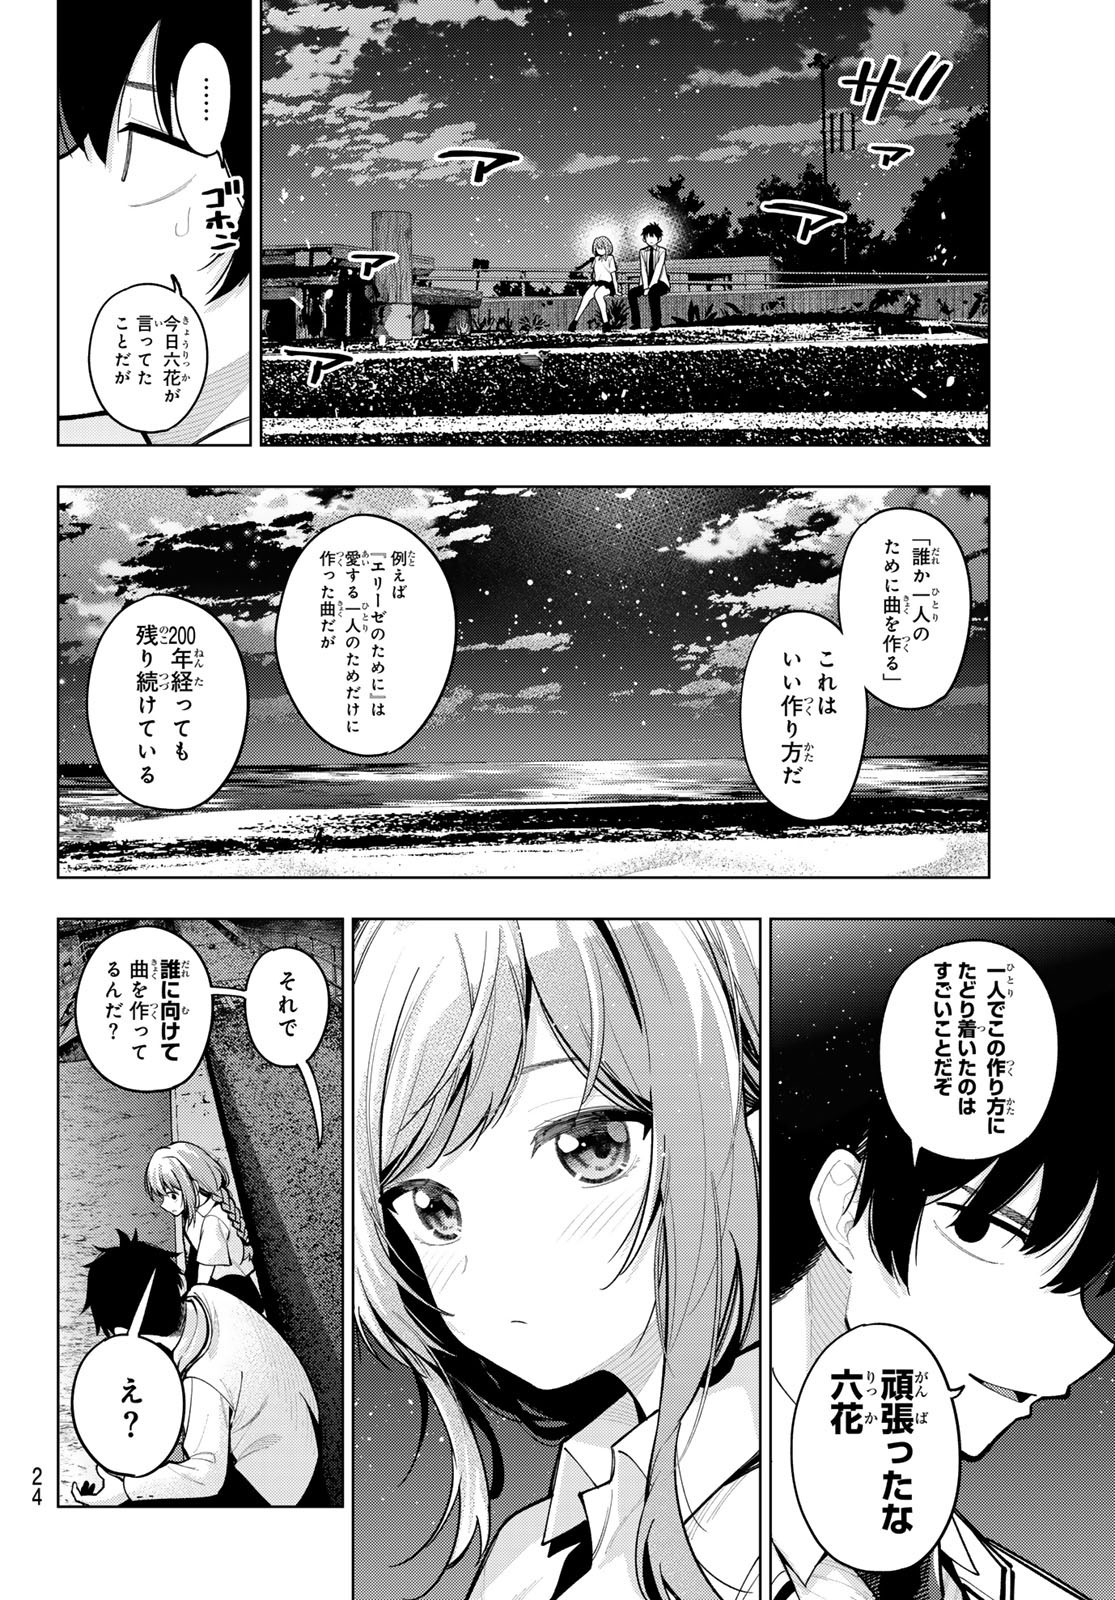 Weekly Shōnen Magazine - 週刊少年マガジン - Chapter 2024-23 - Page 22